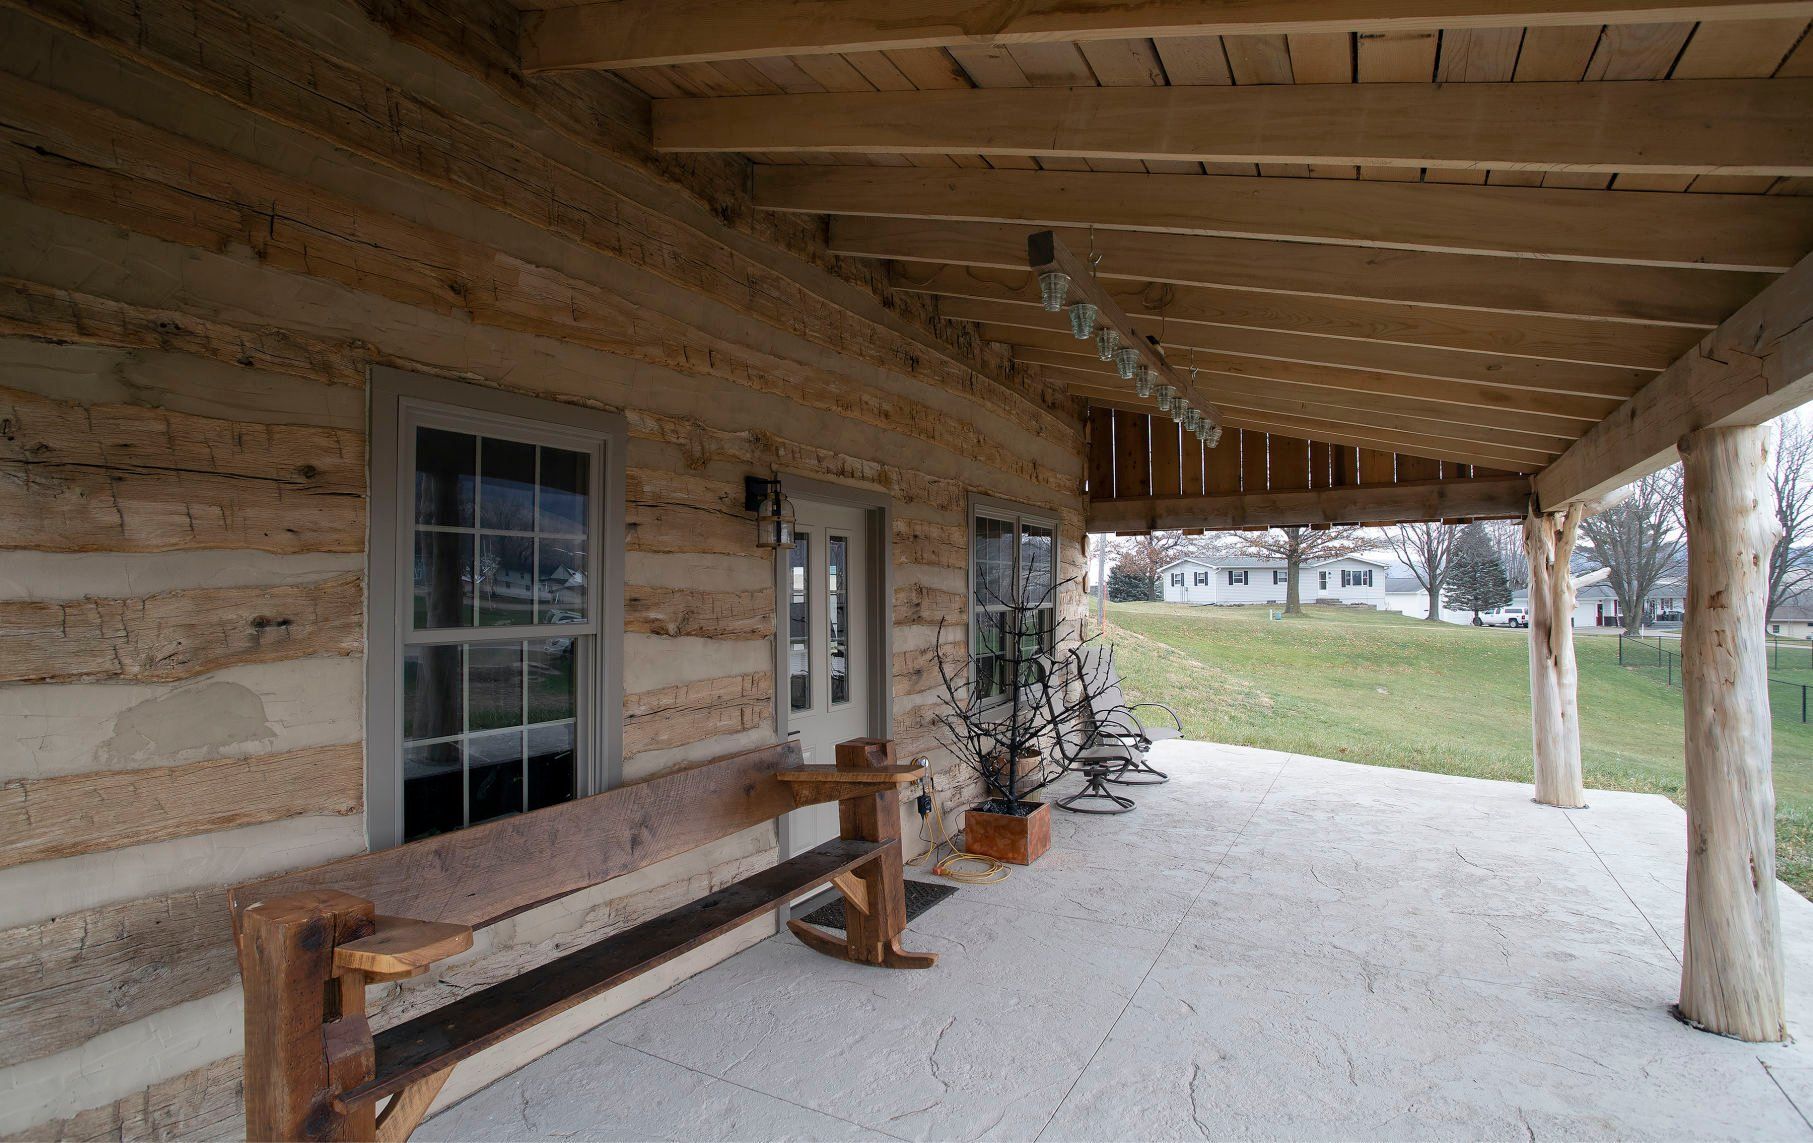 Front porch of the Woodenhead cabin in St. Donatus, Iowa, on Friday, Dec. 10, 2021.    PHOTO CREDIT: Stephen Gassman